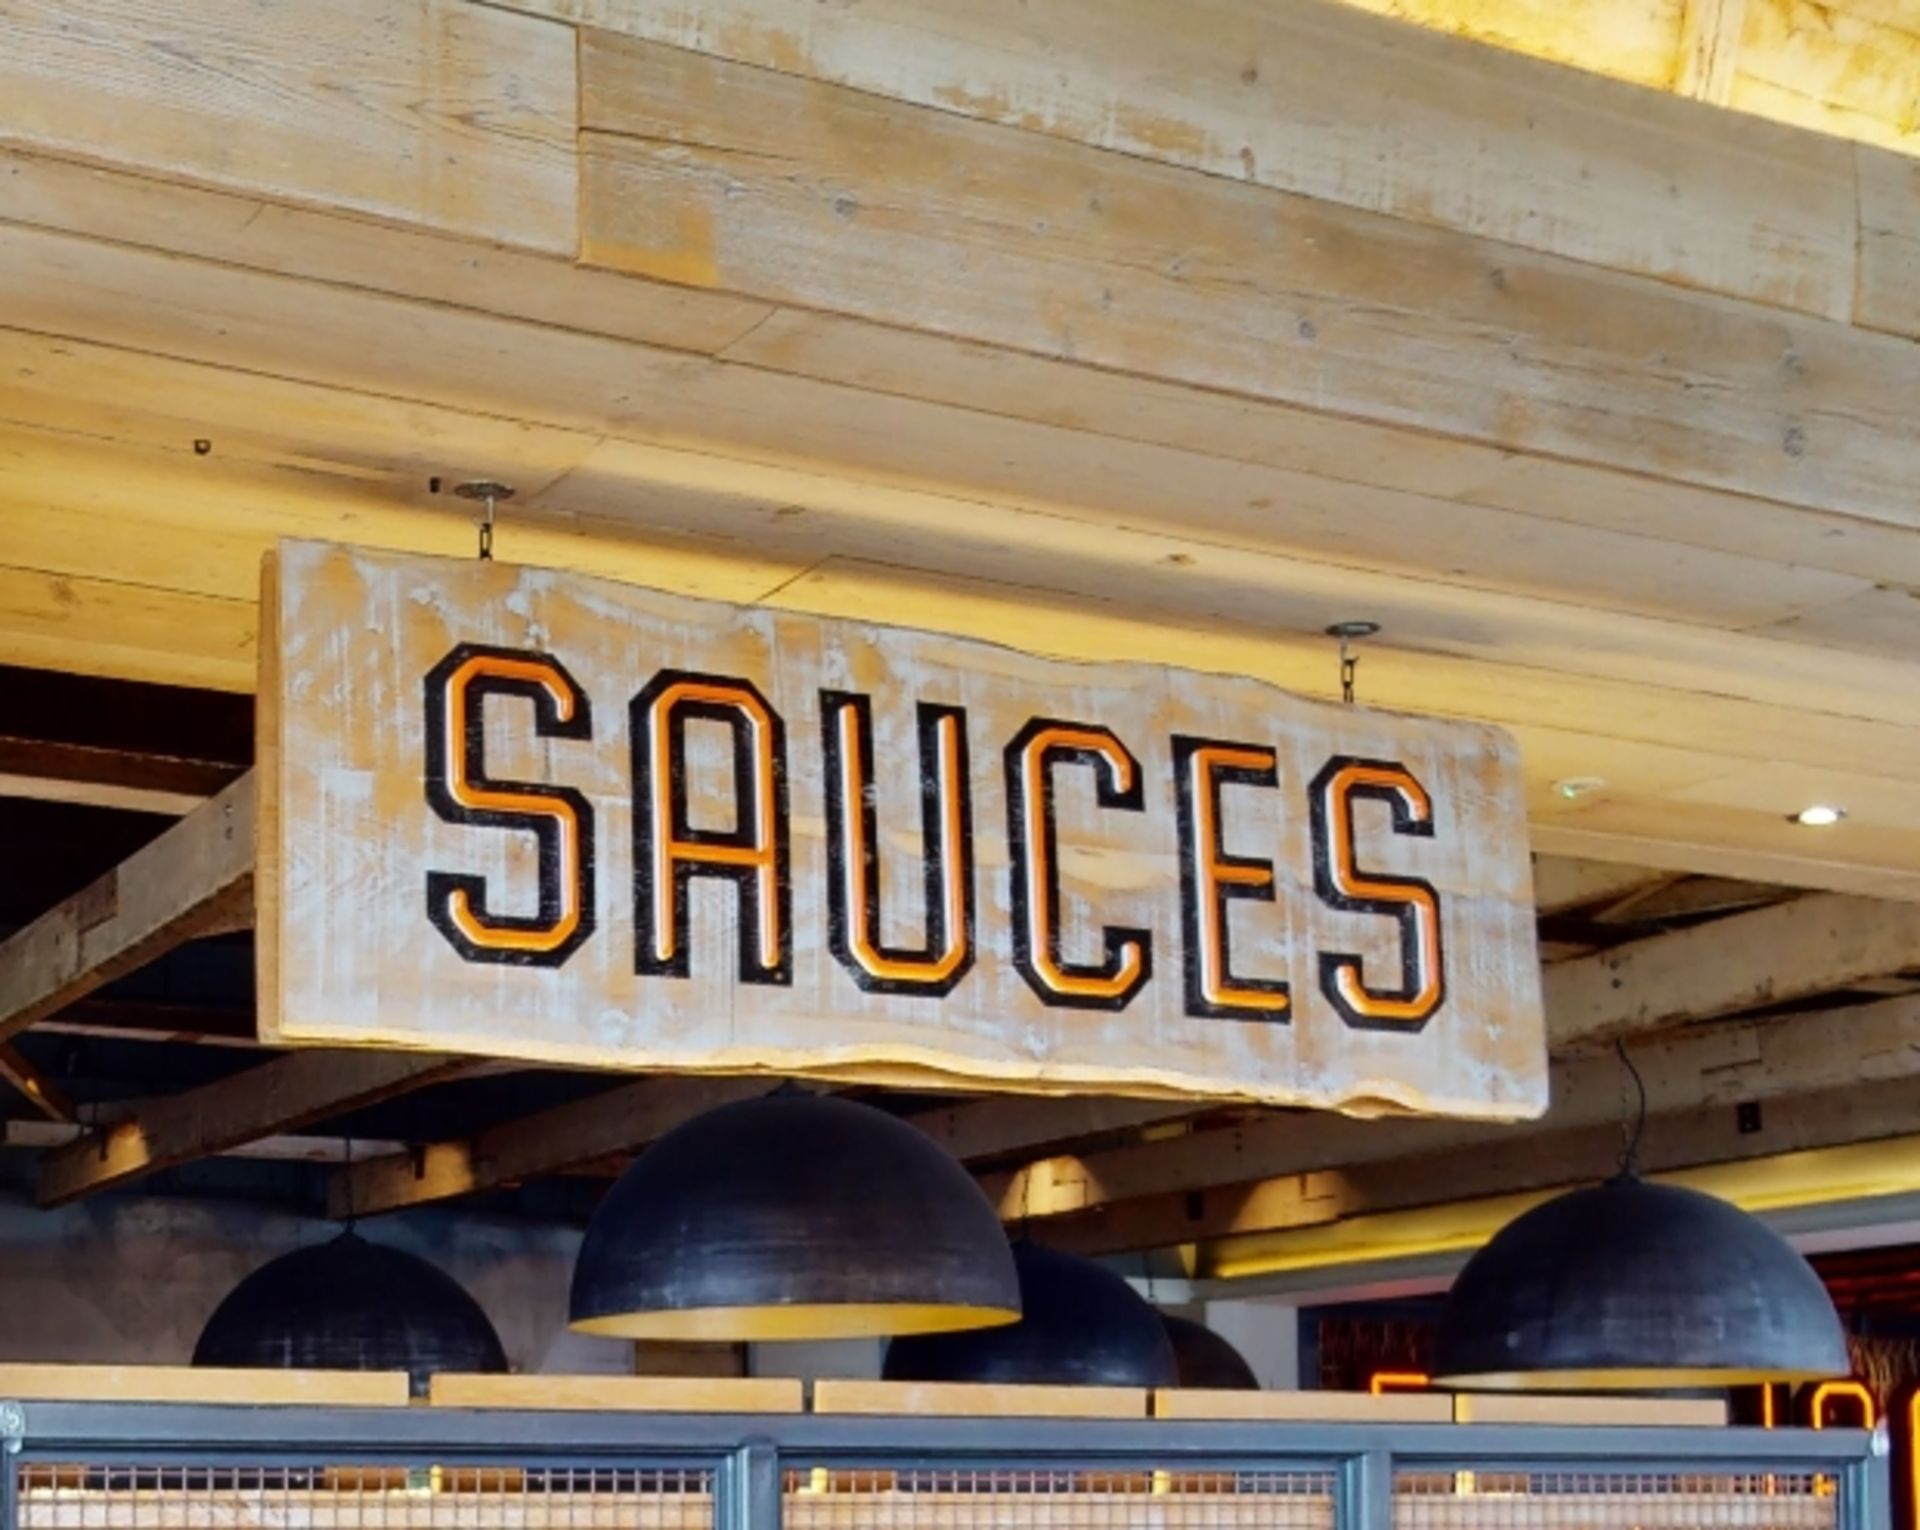 1 x Suspended Ceiling SAUCES Double Sided Signage - Natural Back to Back Wooden Slabs With Live - Image 2 of 6